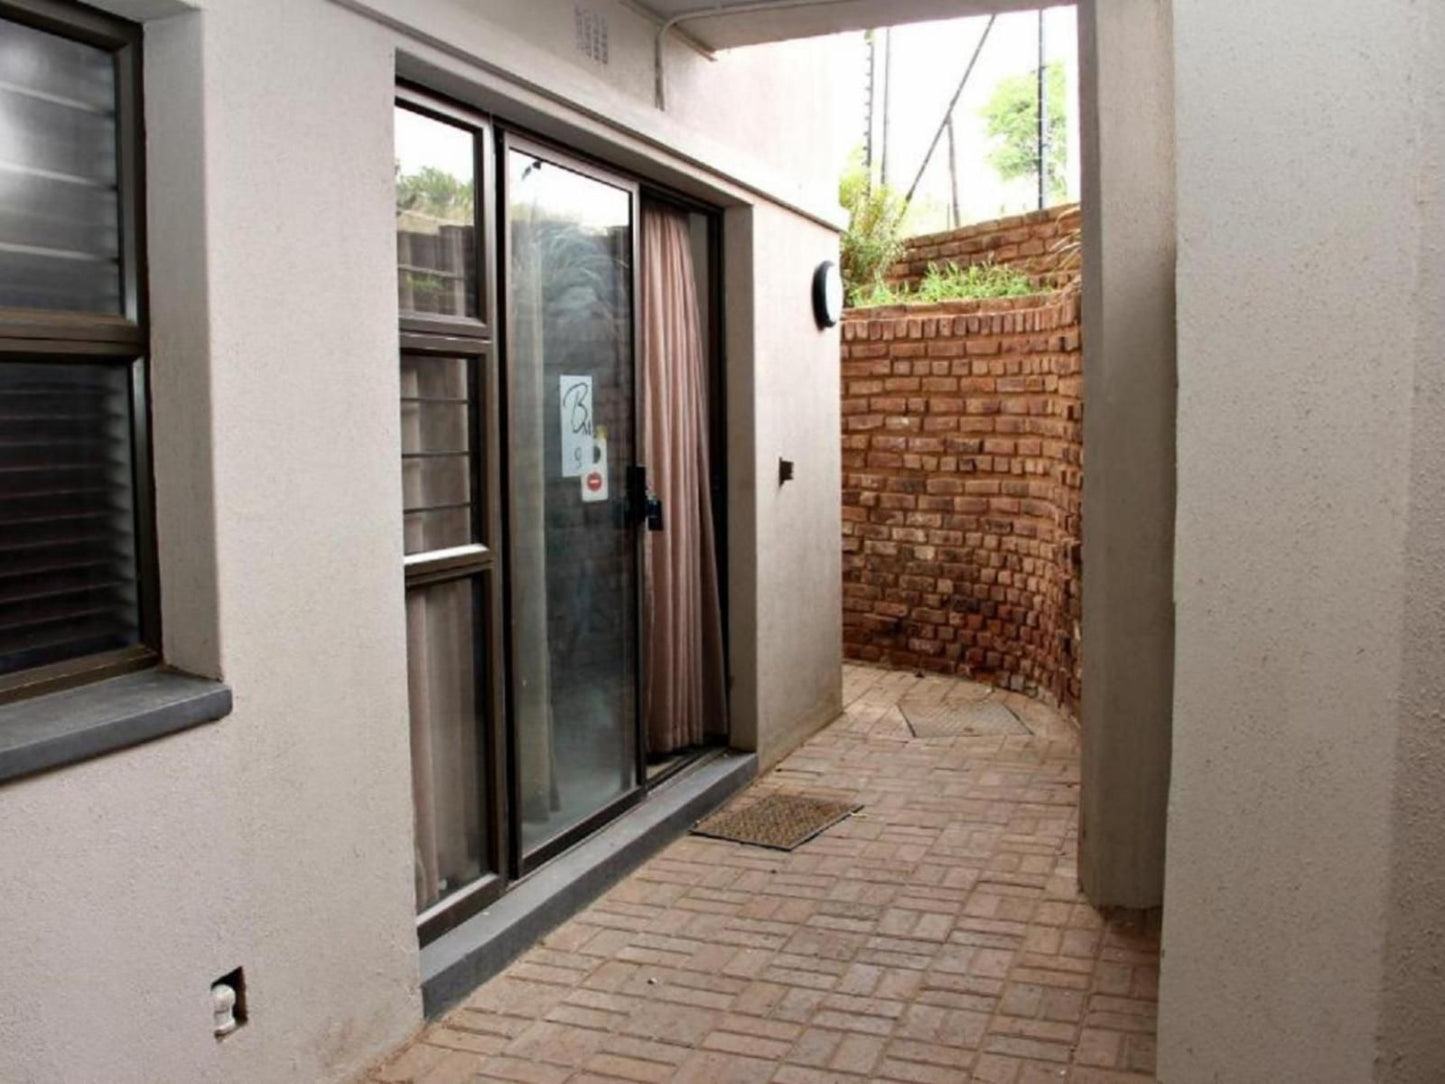 Browns Manor Upington Northern Cape South Africa Door, Architecture, House, Building